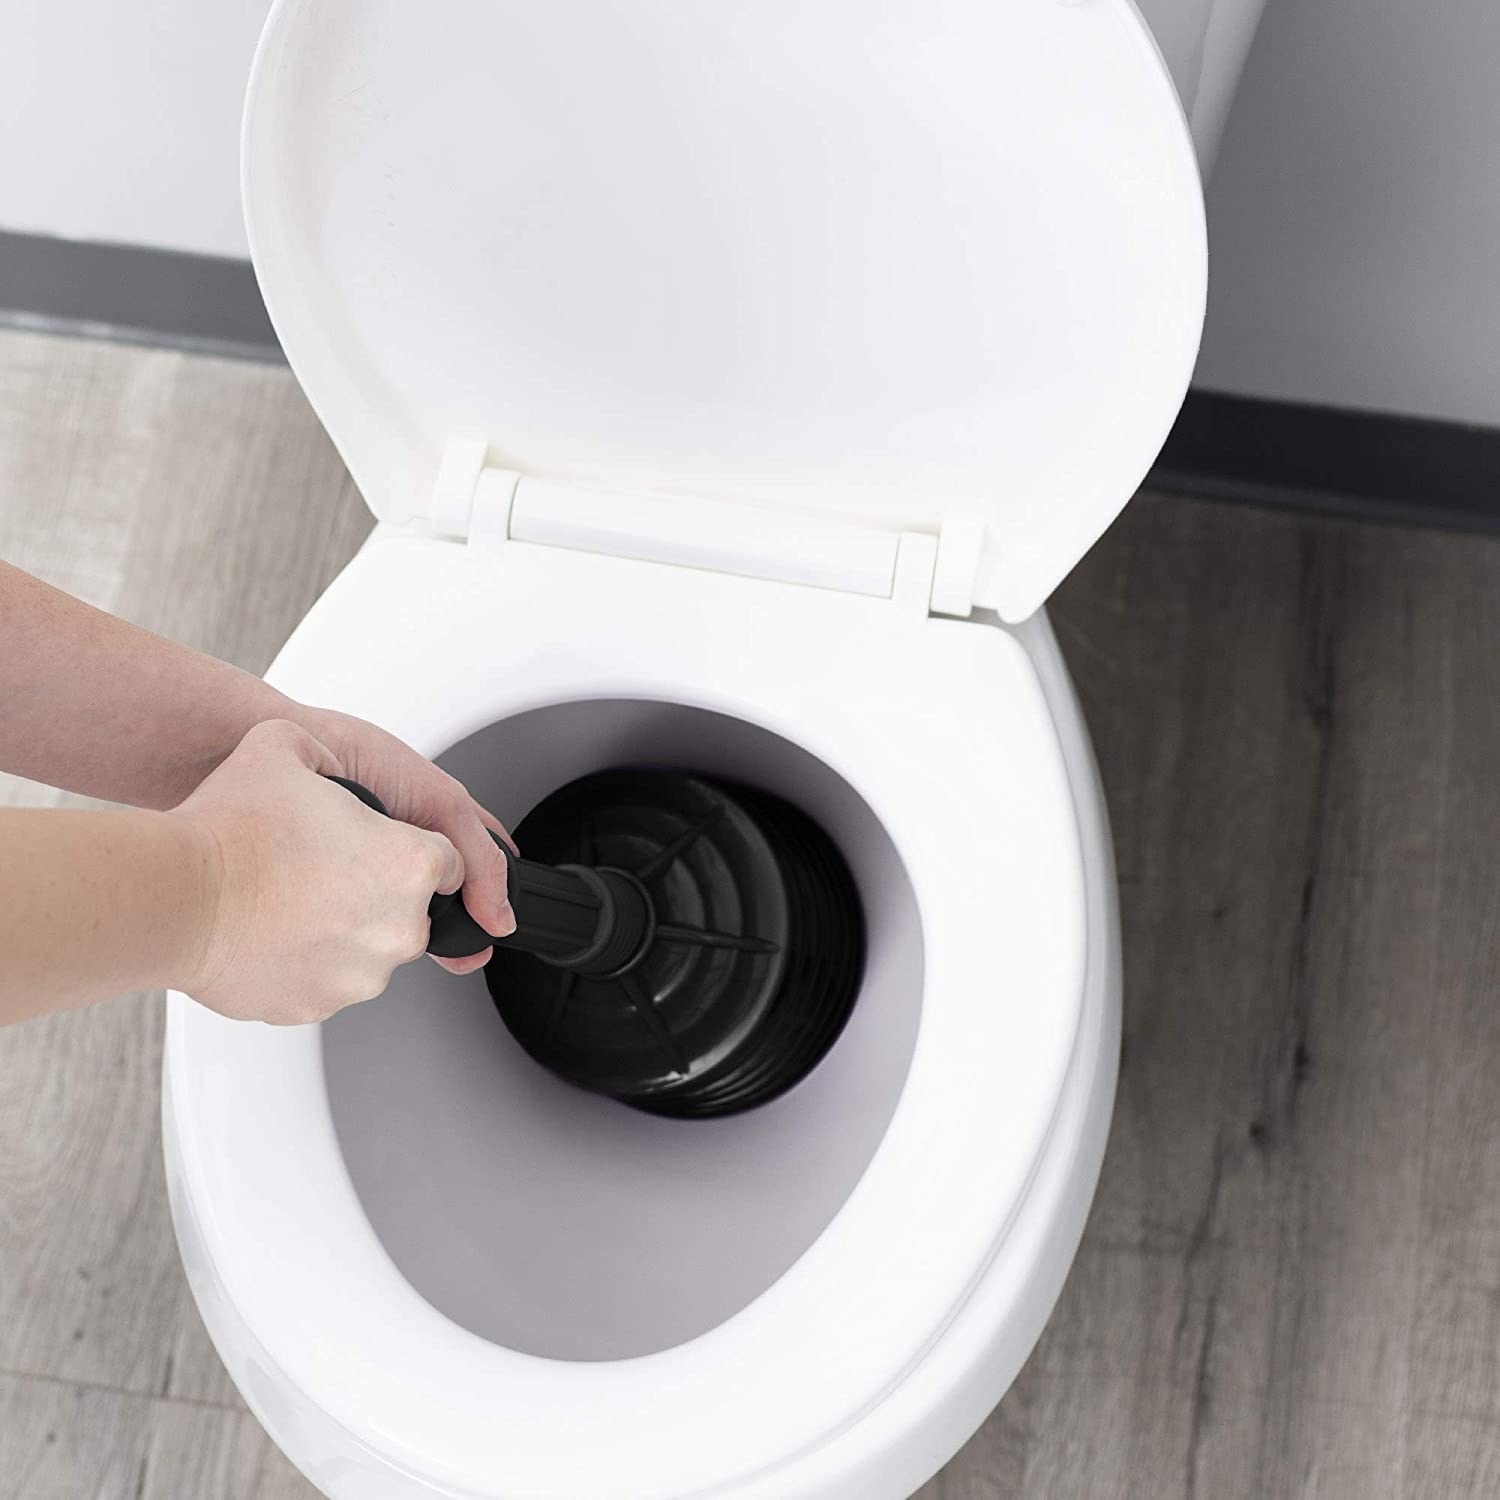 the plunger being used in a toilet 